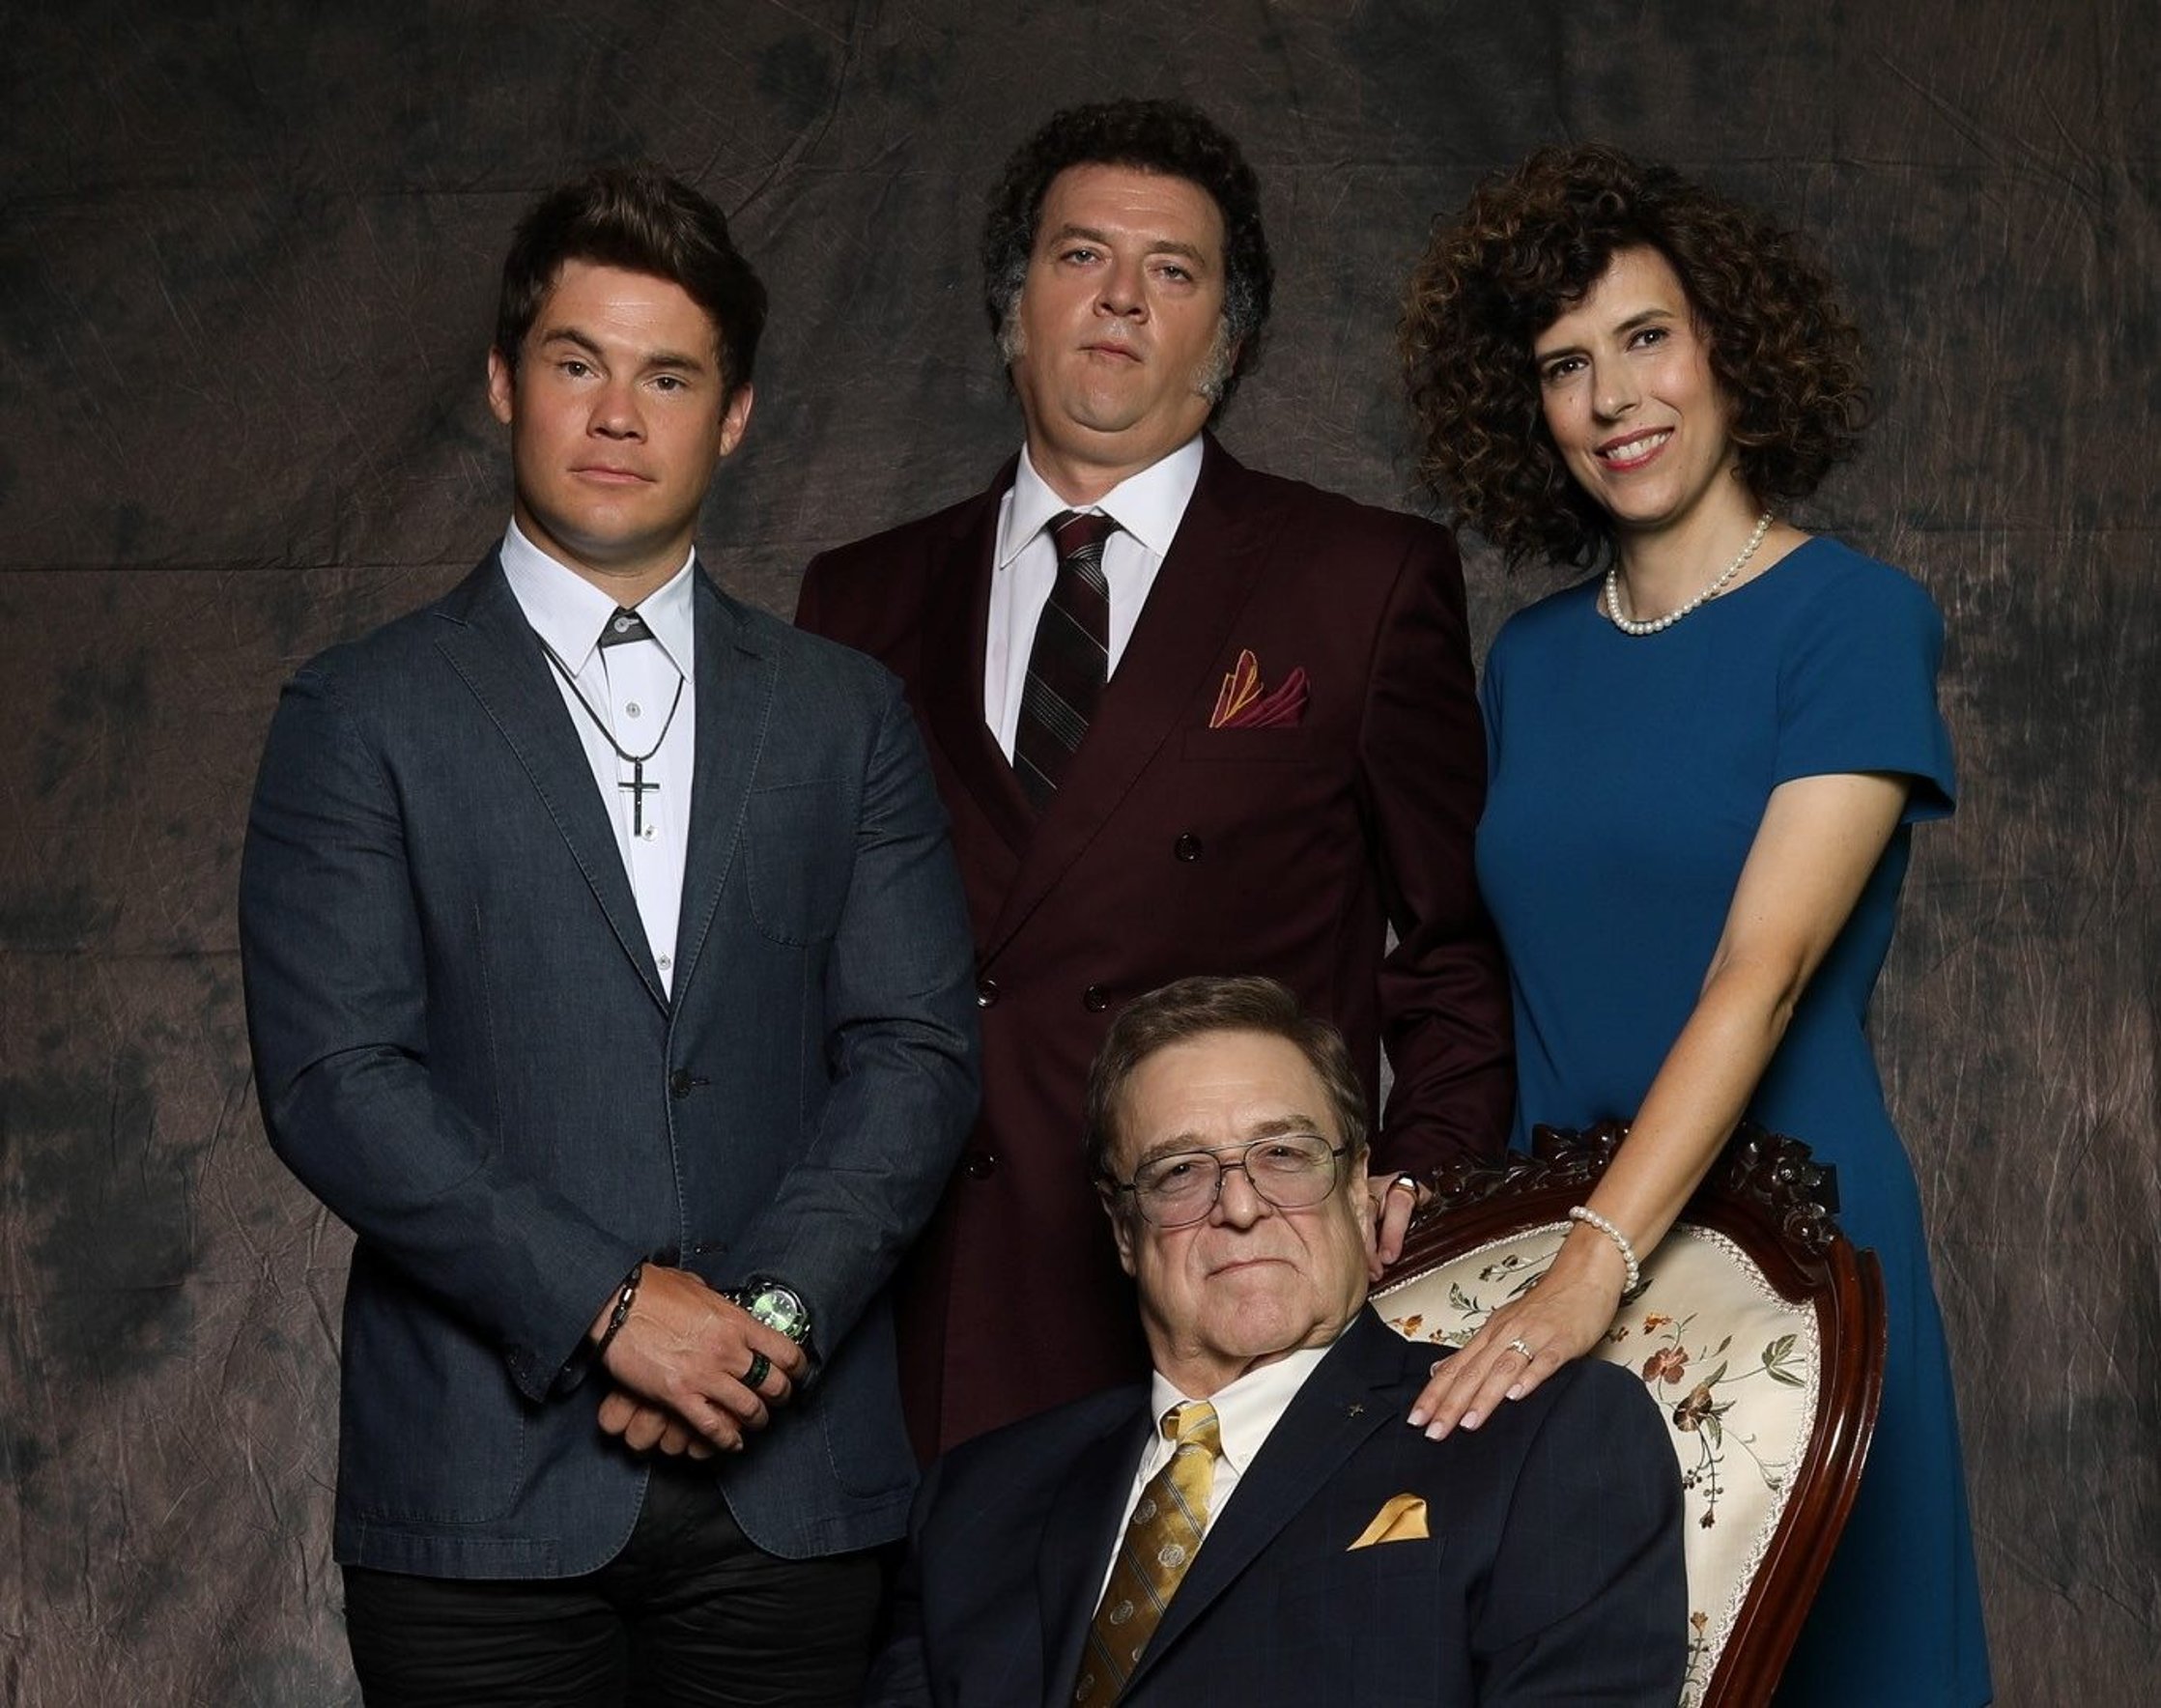 HBO’s The Righteous Gemstones is Casting Featured Roles